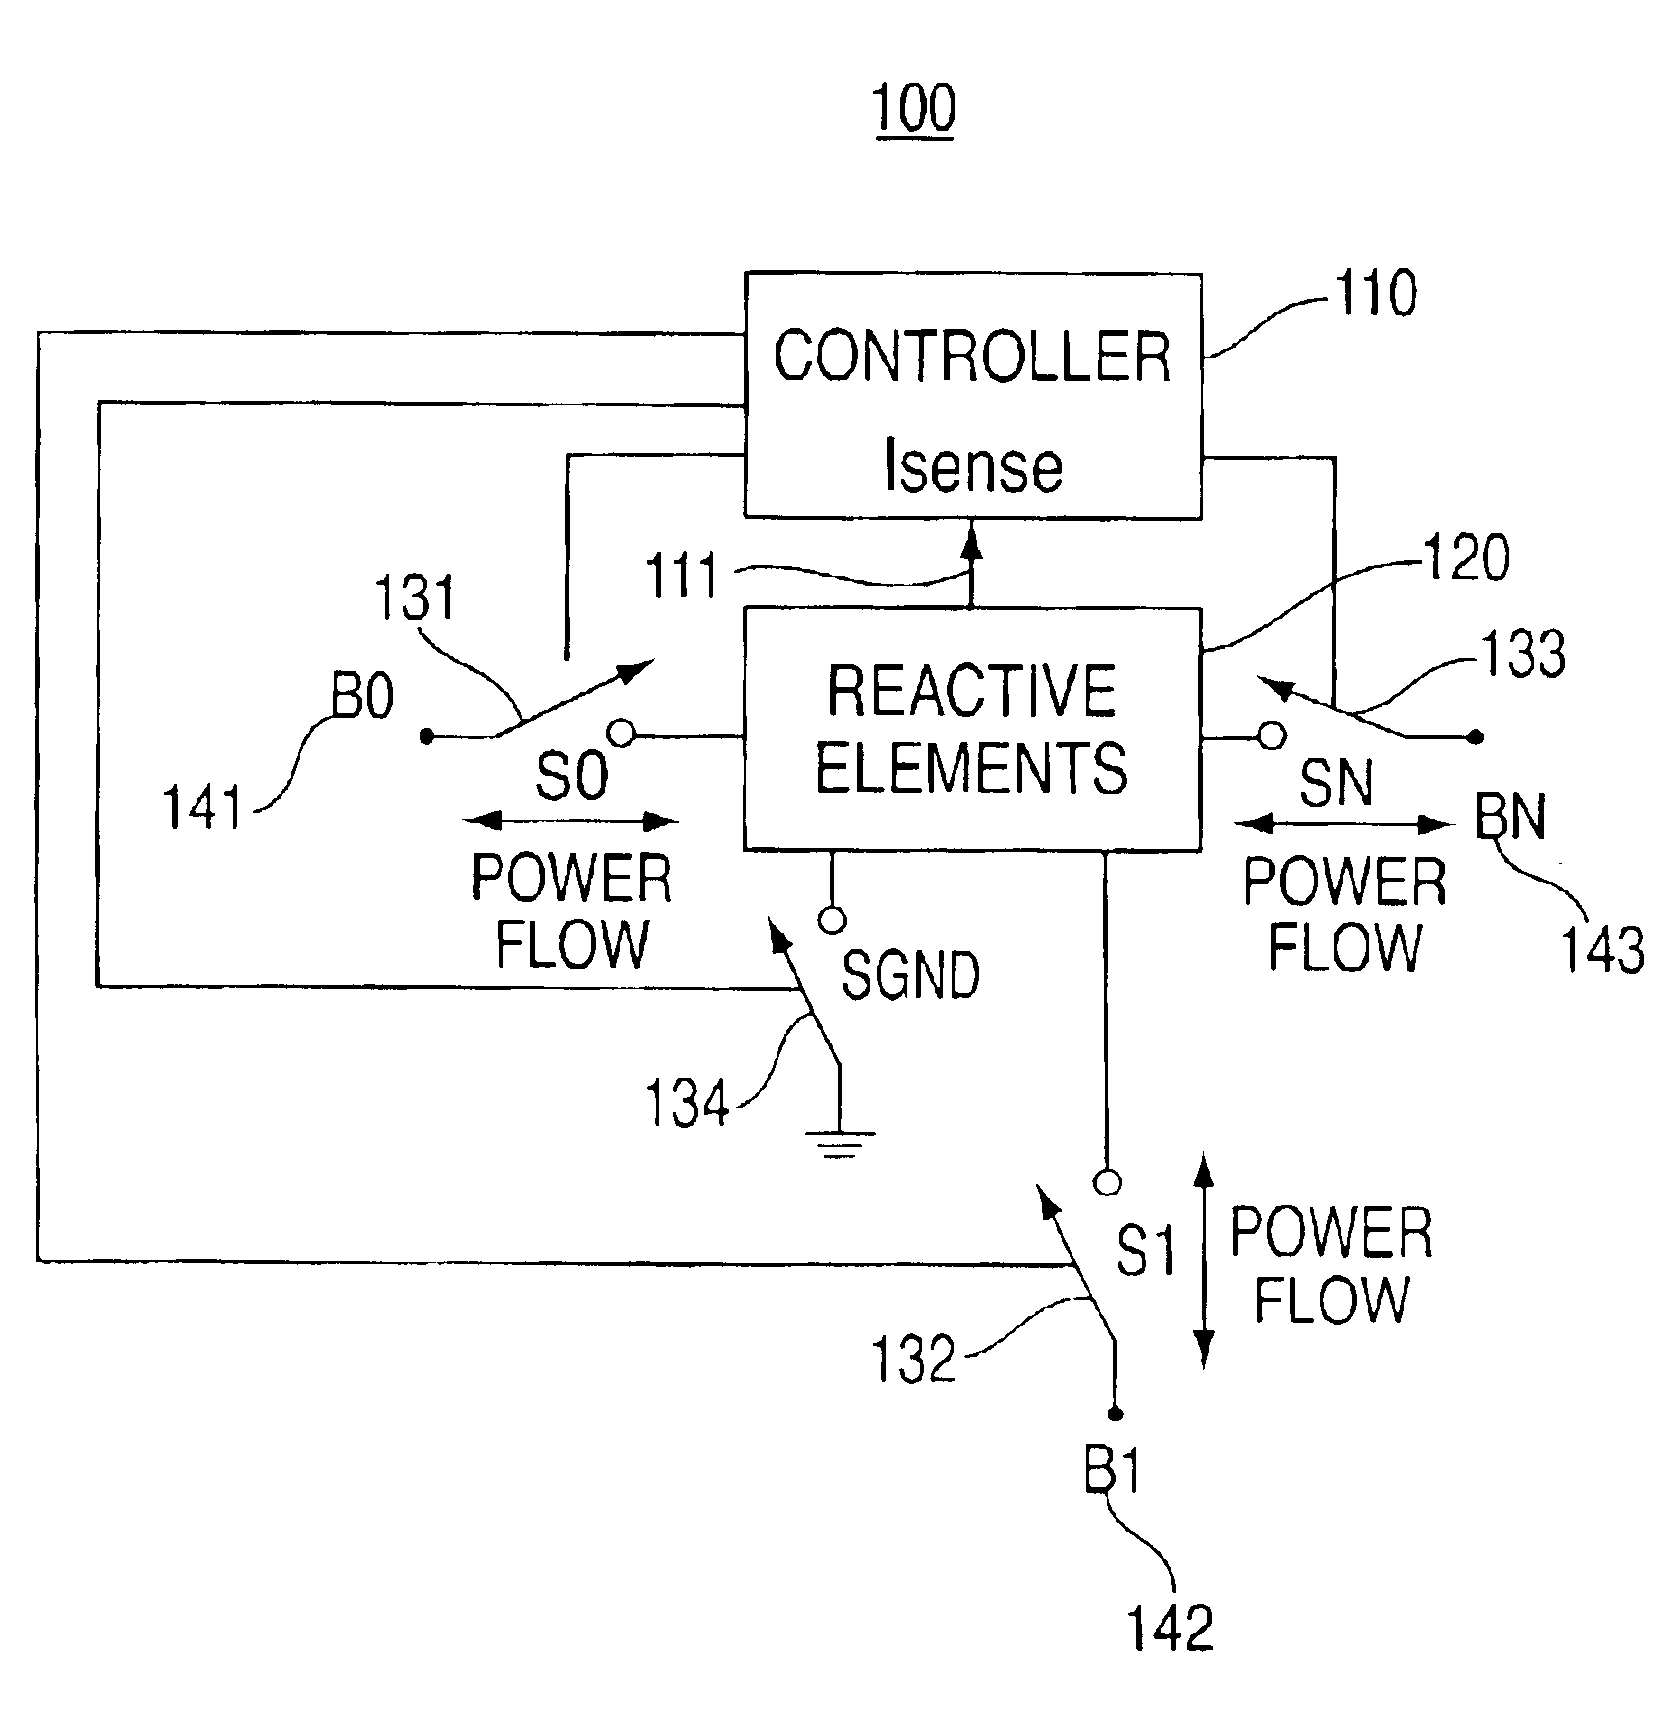 Bidirectional power conversion with multiple control loops